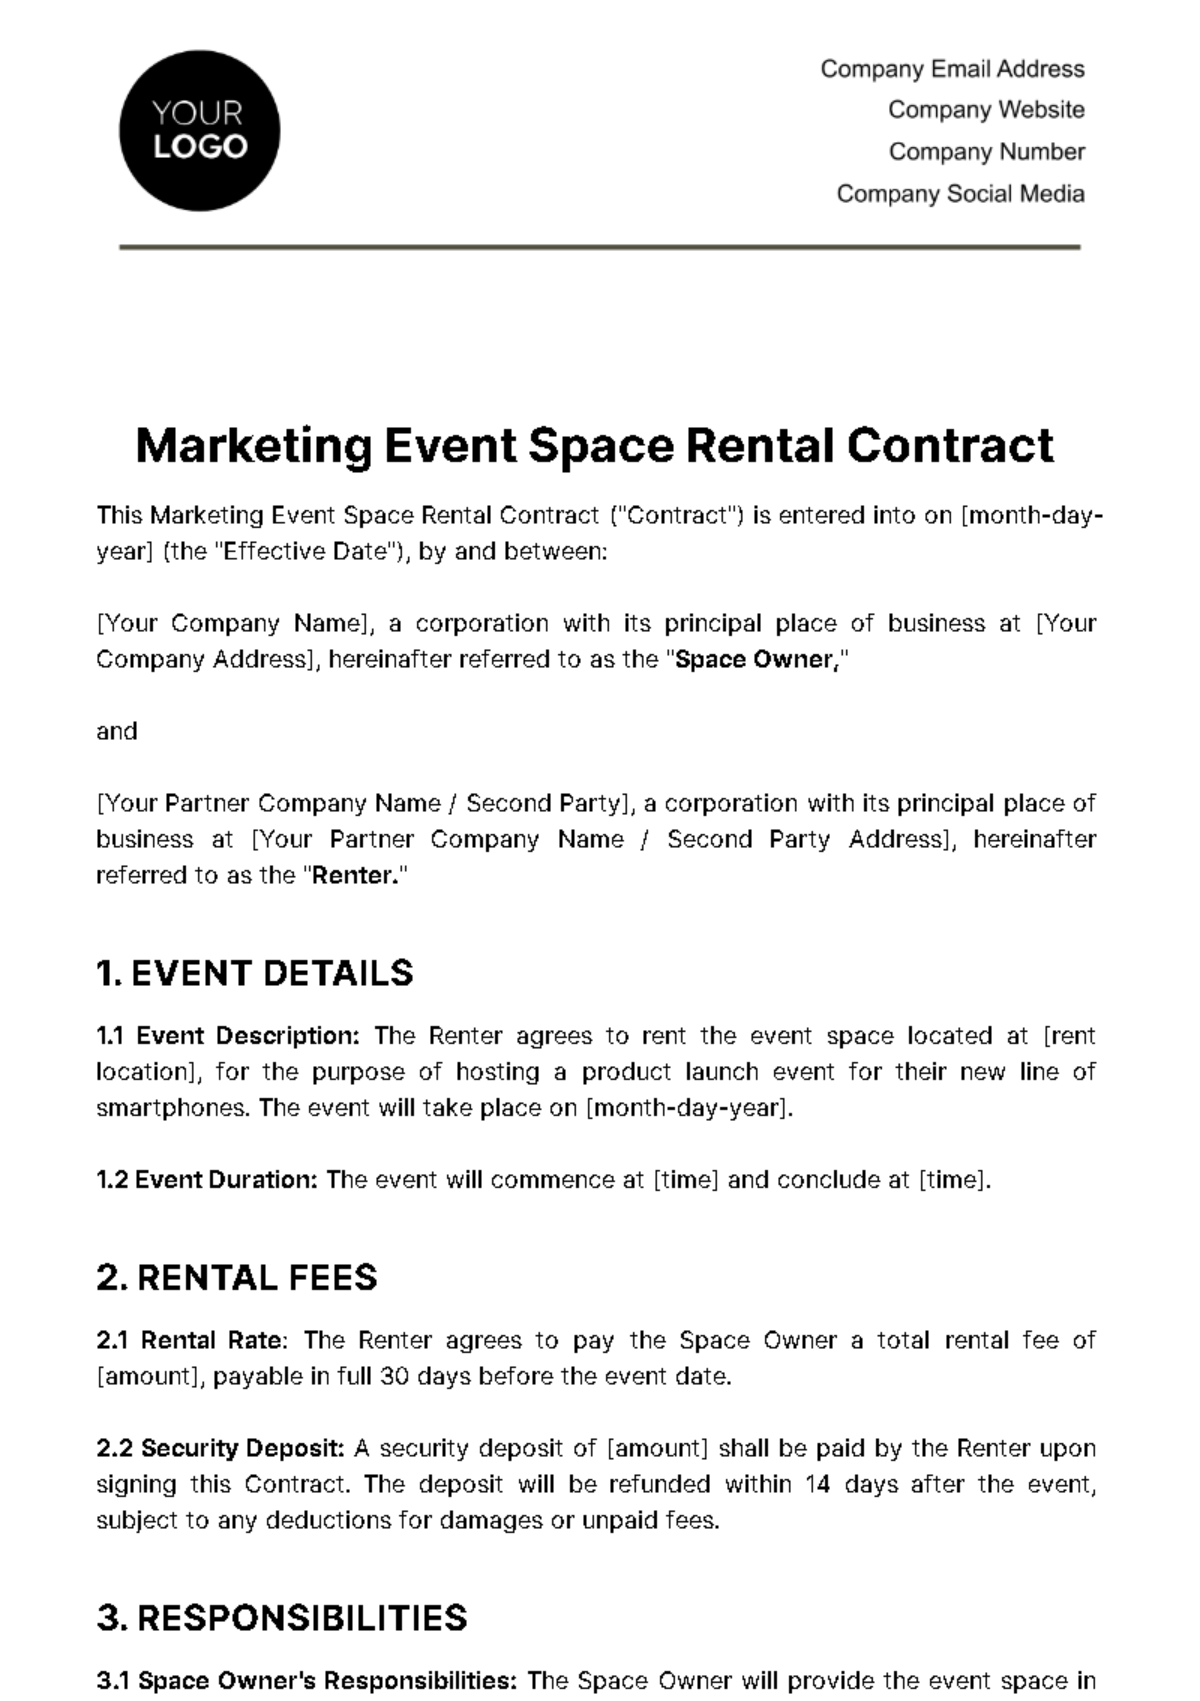 Marketing Event Space Rental Contract Template